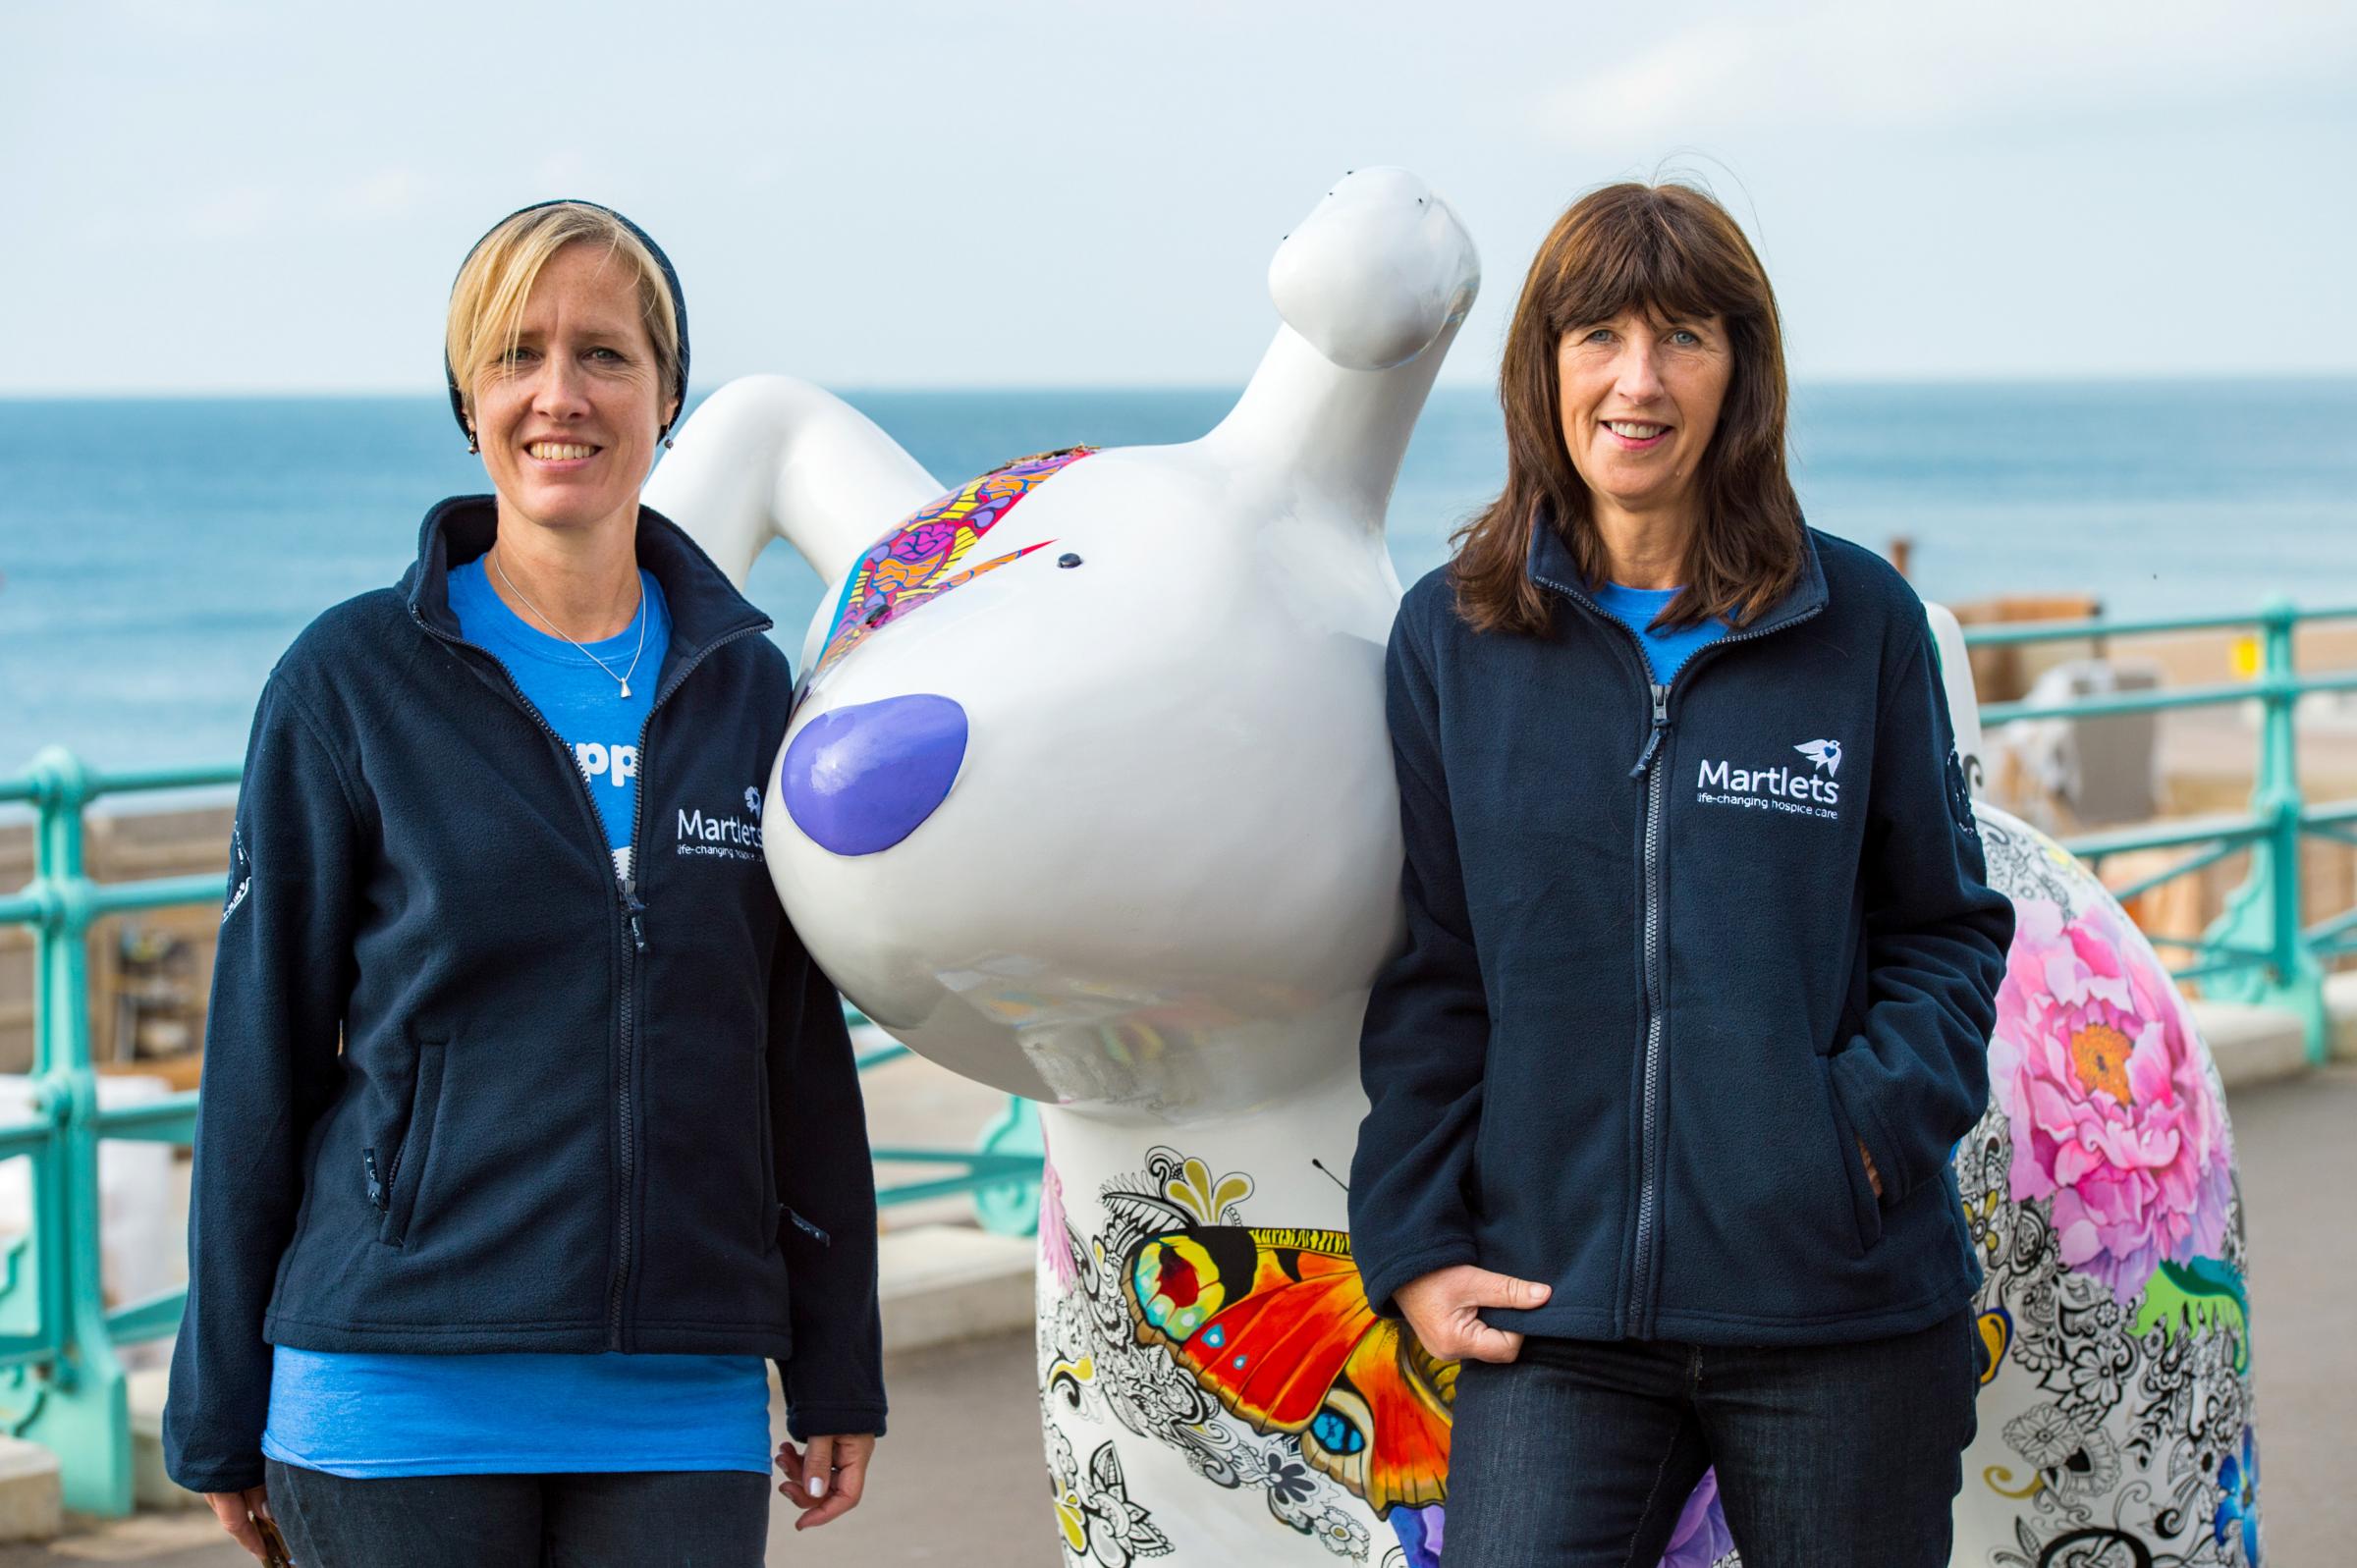 Meet the volunteers in charge of protecting the Snowdogs